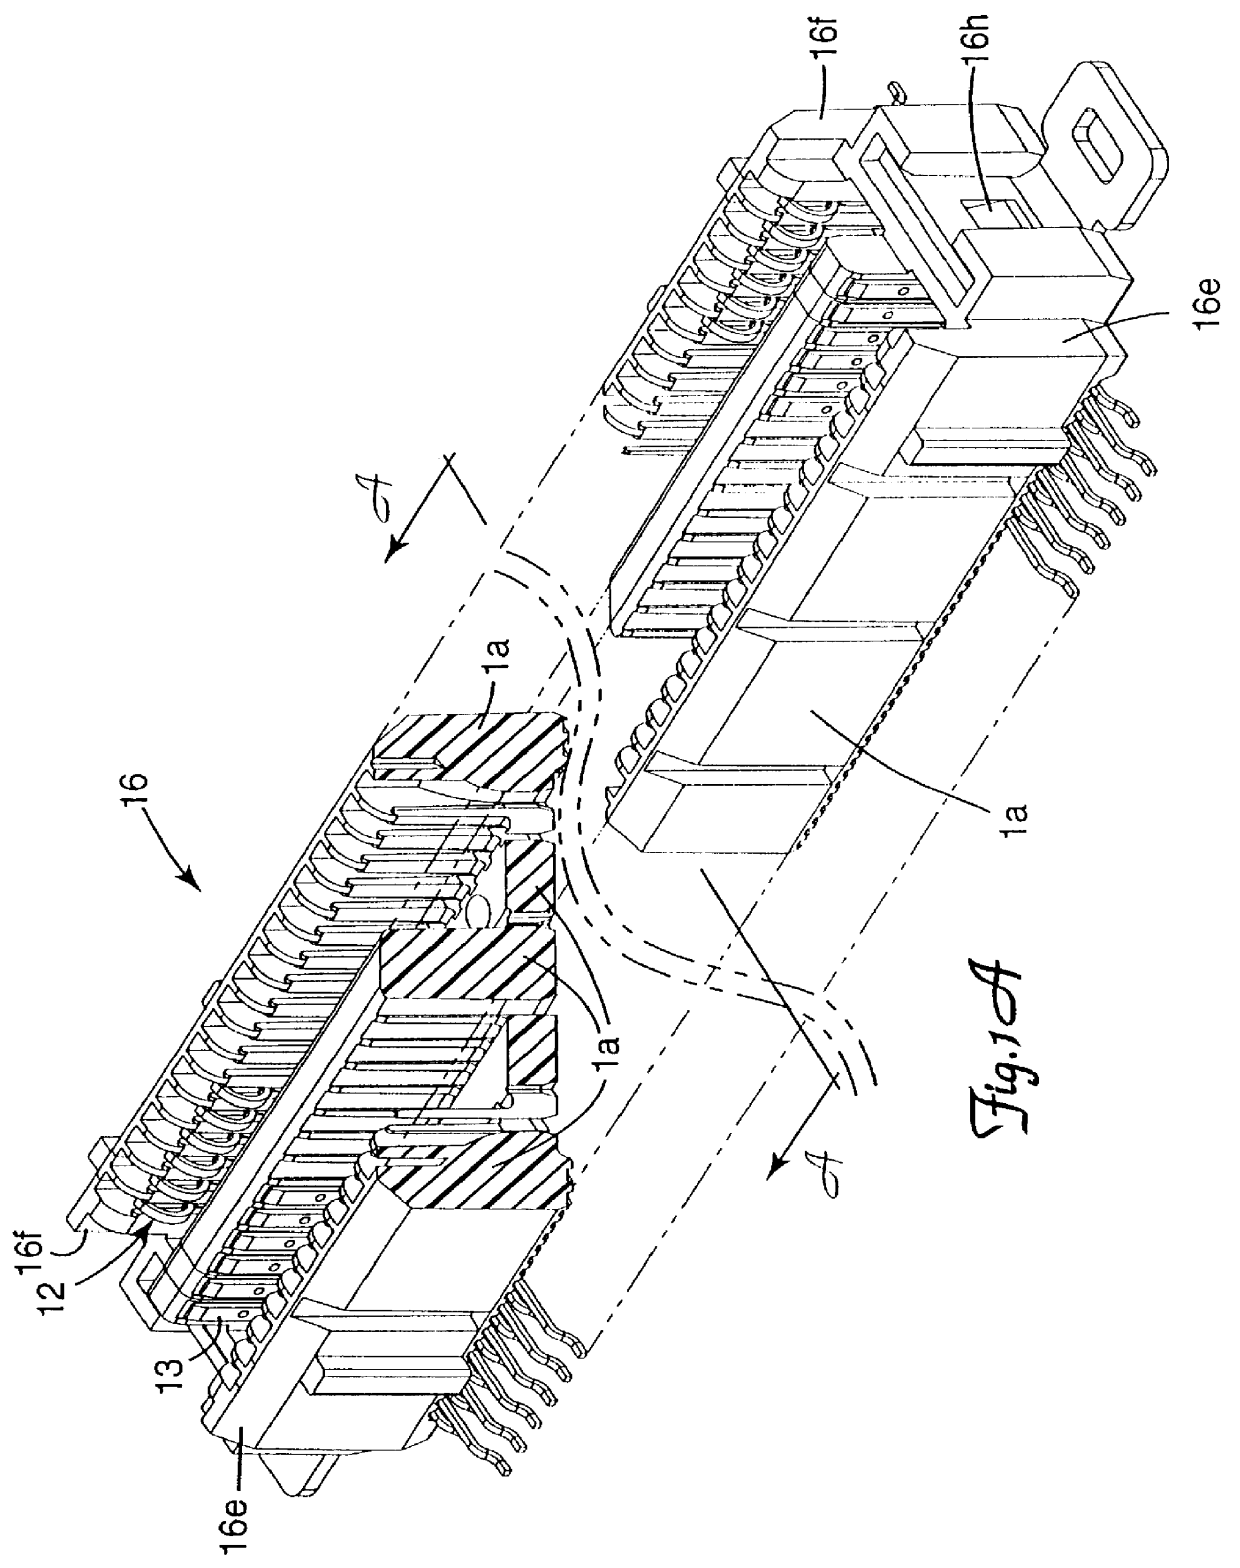 Electrical interconnection system and device